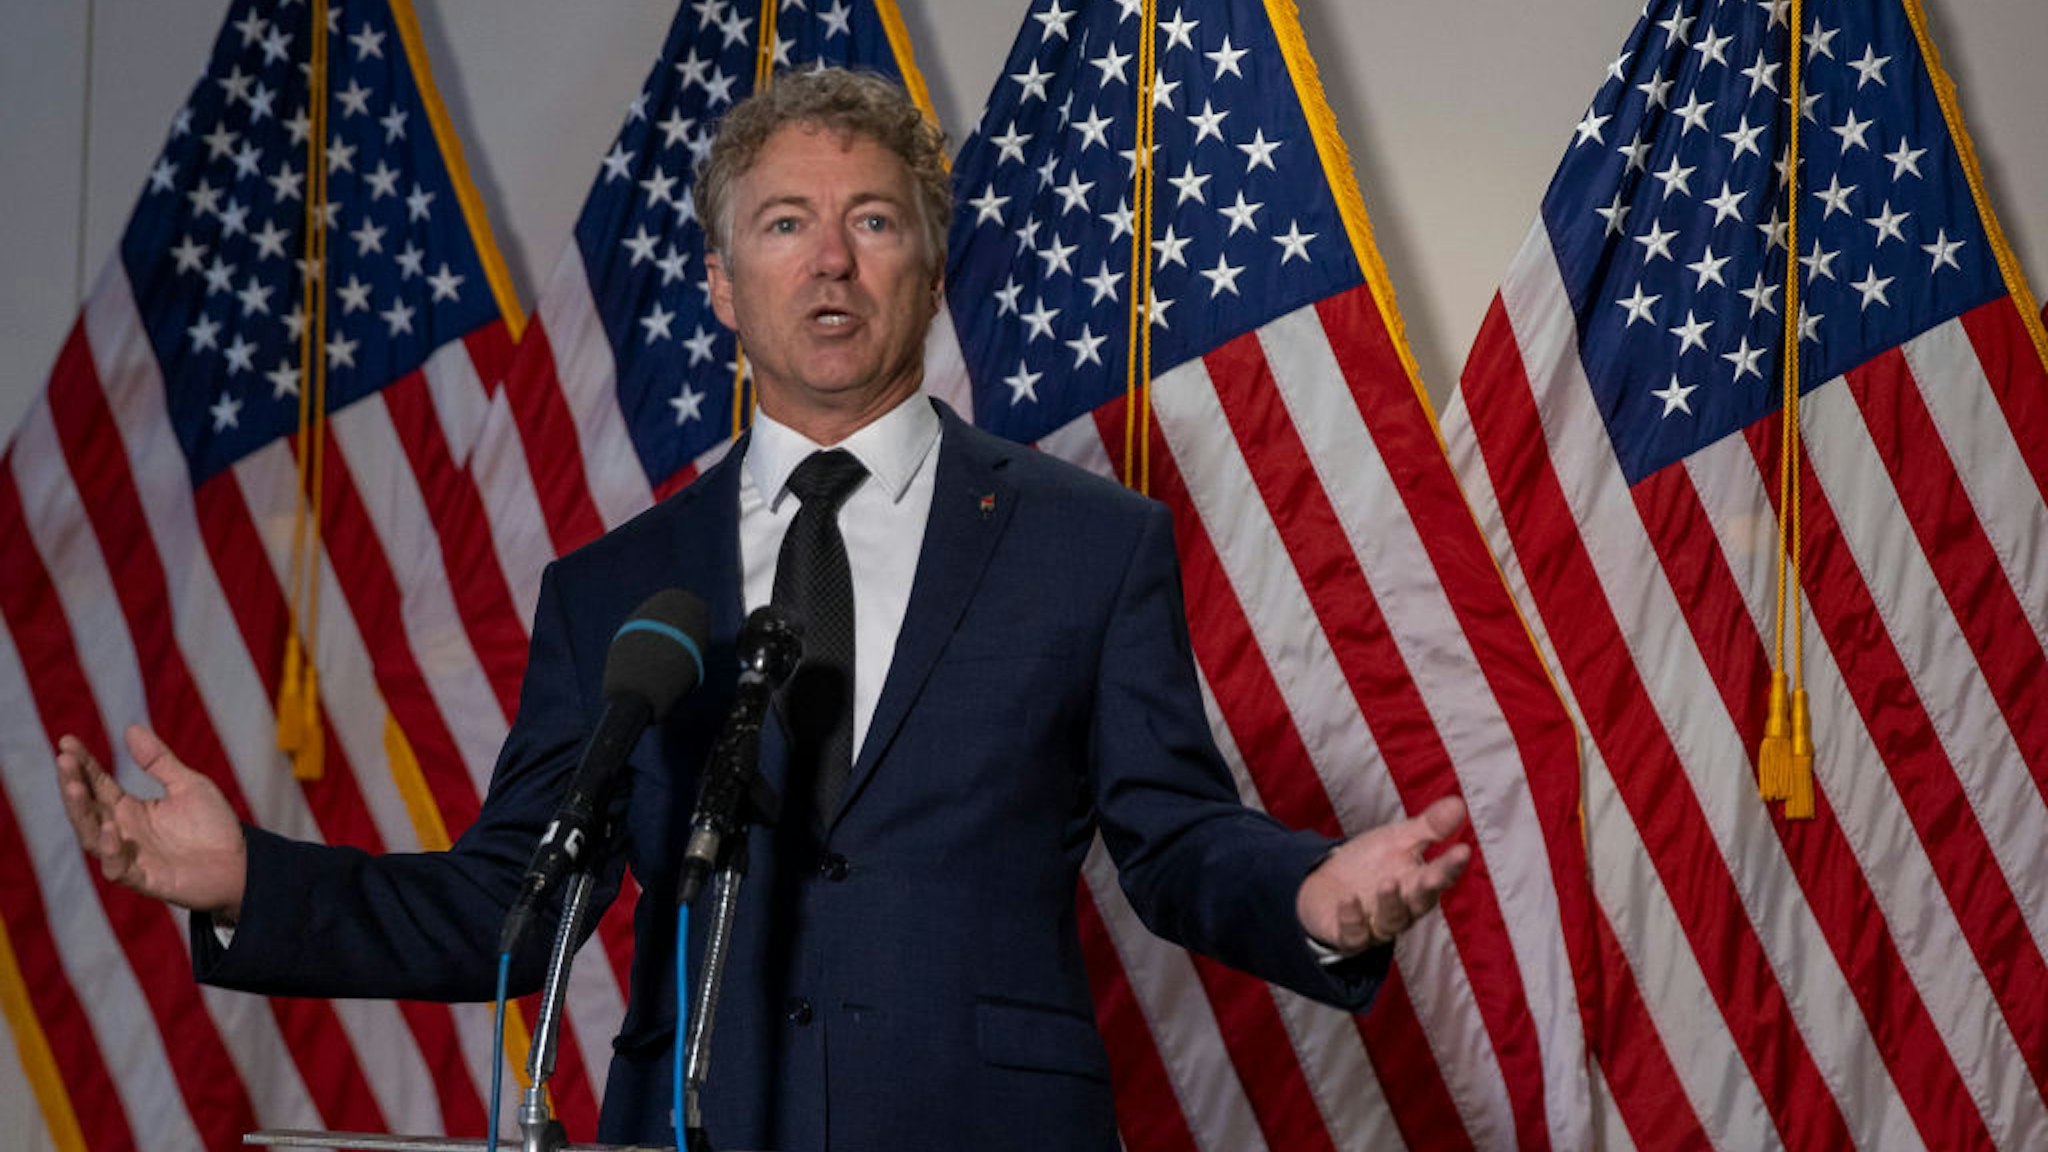 Sen. Rand Paul (R-KY) speaks to the media after the weekly policy luncheons on Capitol Hill July 21, 2020 in Washington, DC.